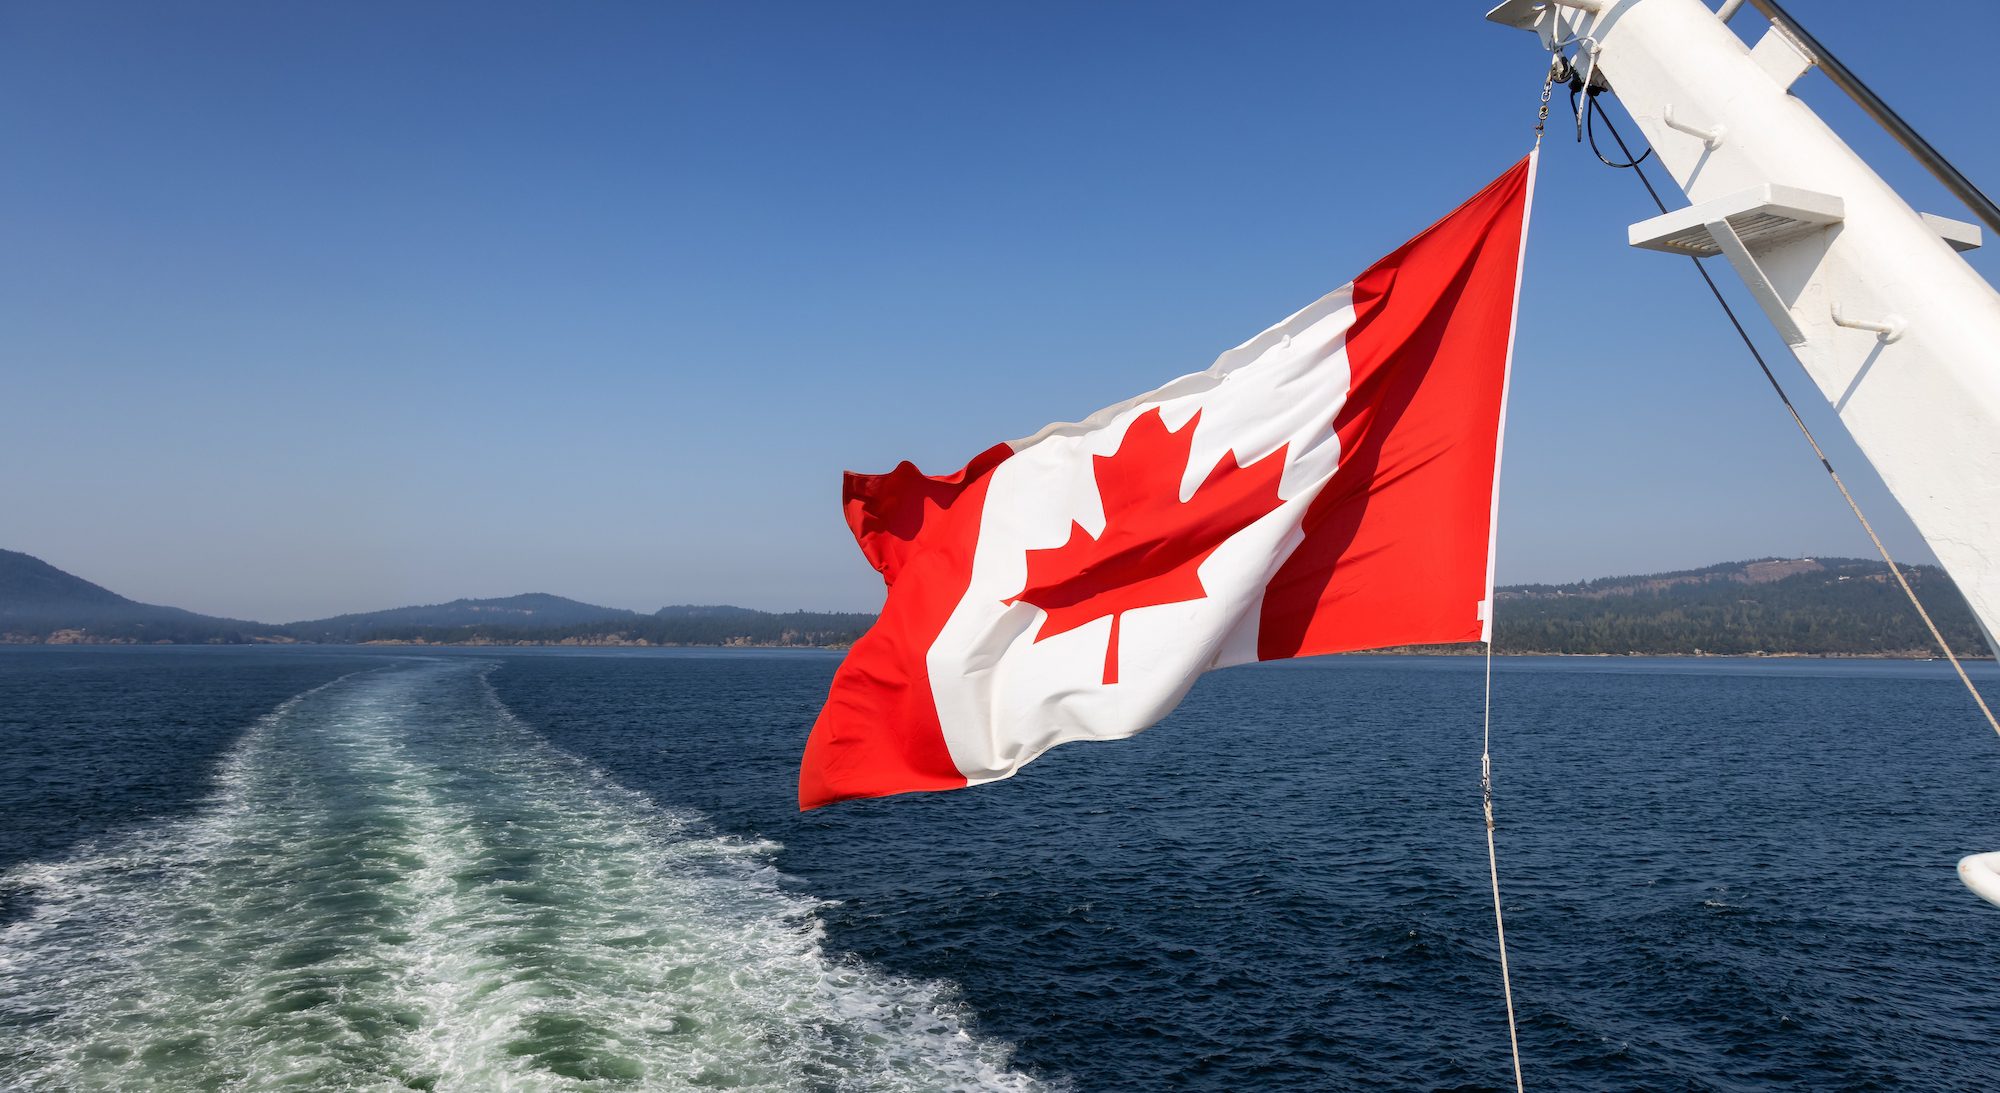 Canadian flag on the stern of a ship